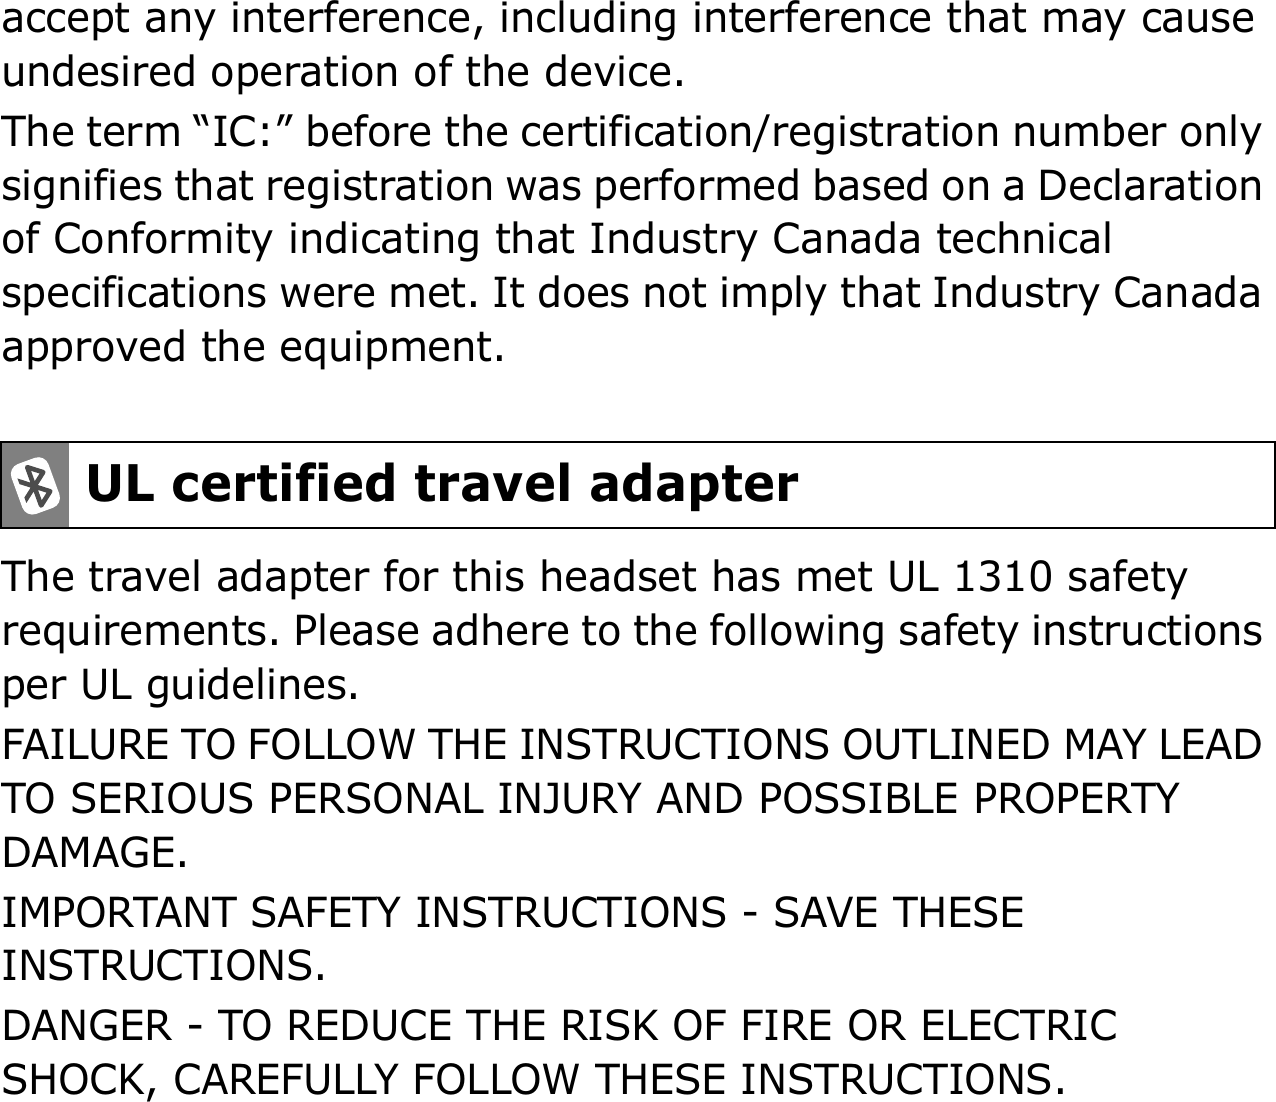 accept any interference, including interference that may cause undesired operation of the device.The term “IC:” before the certification/registration number only signifies that registration was performed based on a Declaration of Conformity indicating that Industry Canada technical specifications were met. It does not imply that Industry Canada approved the equipment. The travel adapter for this headset has met UL 1310 safety requirements. Please adhere to the following safety instructions per UL guidelines.FAILURE TO FOLLOW THE INSTRUCTIONS OUTLINED MAY LEAD TO SERIOUS PERSONAL INJURY AND POSSIBLE PROPERTY DAMAGE.IMPORTANT SAFETY INSTRUCTIONS - SAVE THESE INSTRUCTIONS.DANGER - TO REDUCE THE RISK OF FIRE OR ELECTRIC SHOCK, CAREFULLY FOLLOW THESE INSTRUCTIONS.UL certified travel adapter